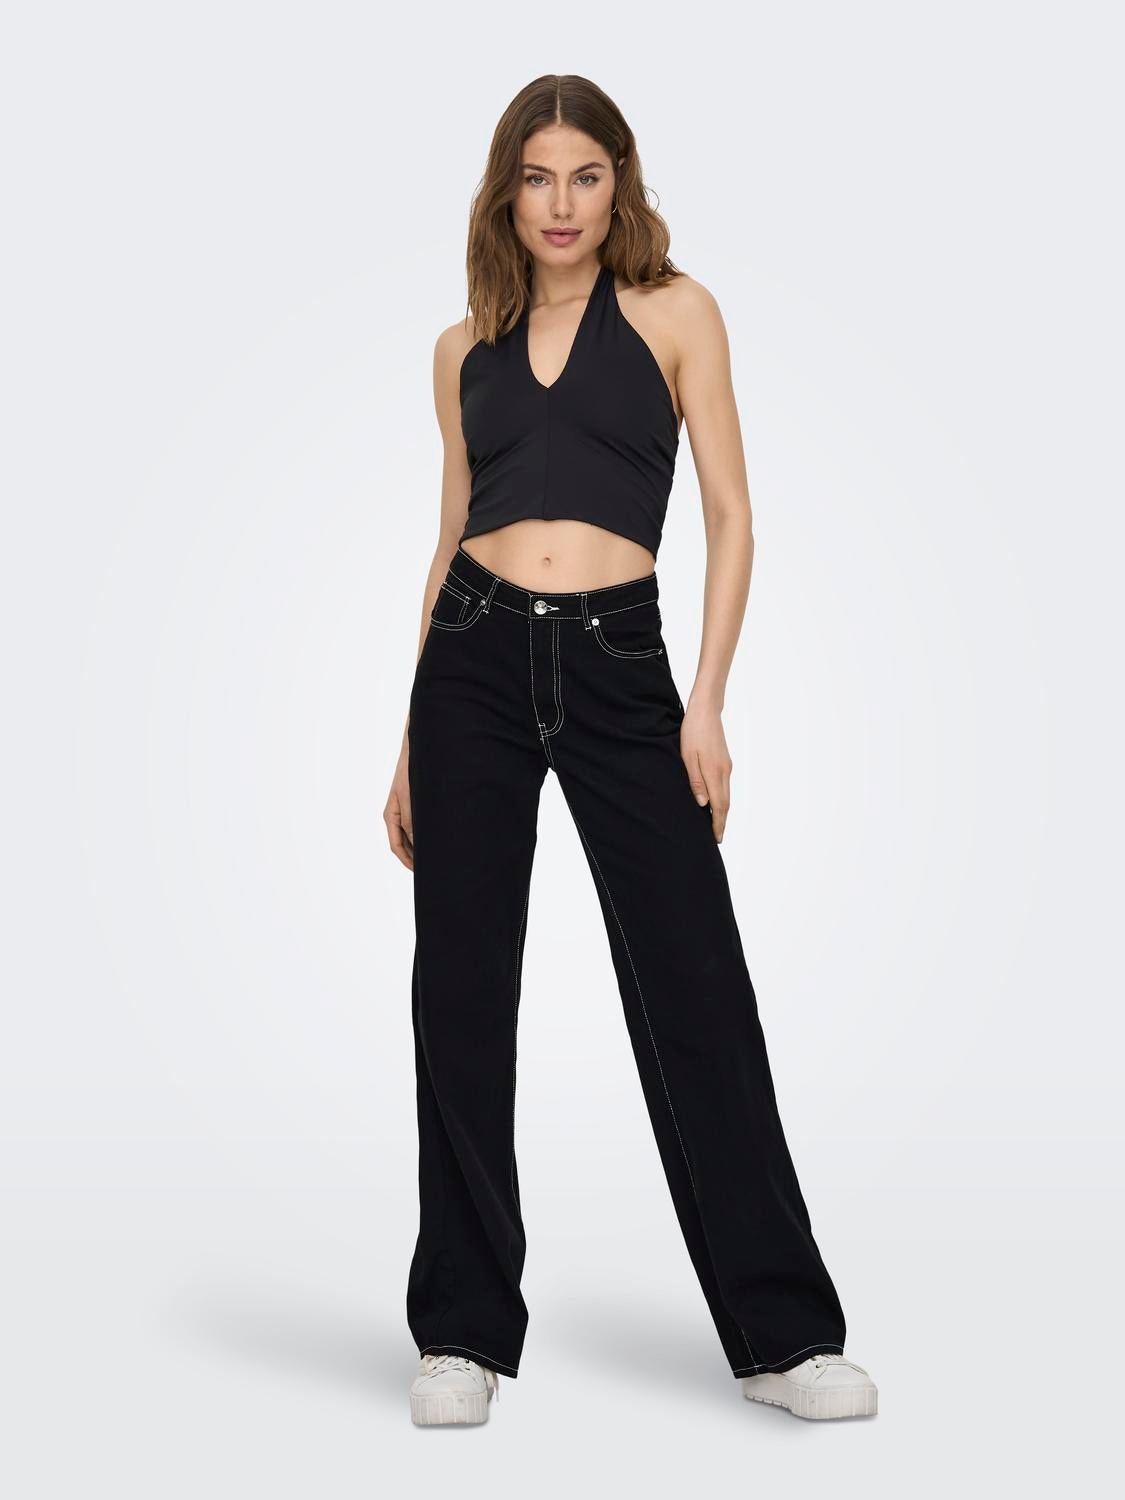 ONLY Wide Leg Fit Trousers -Black - 15284290